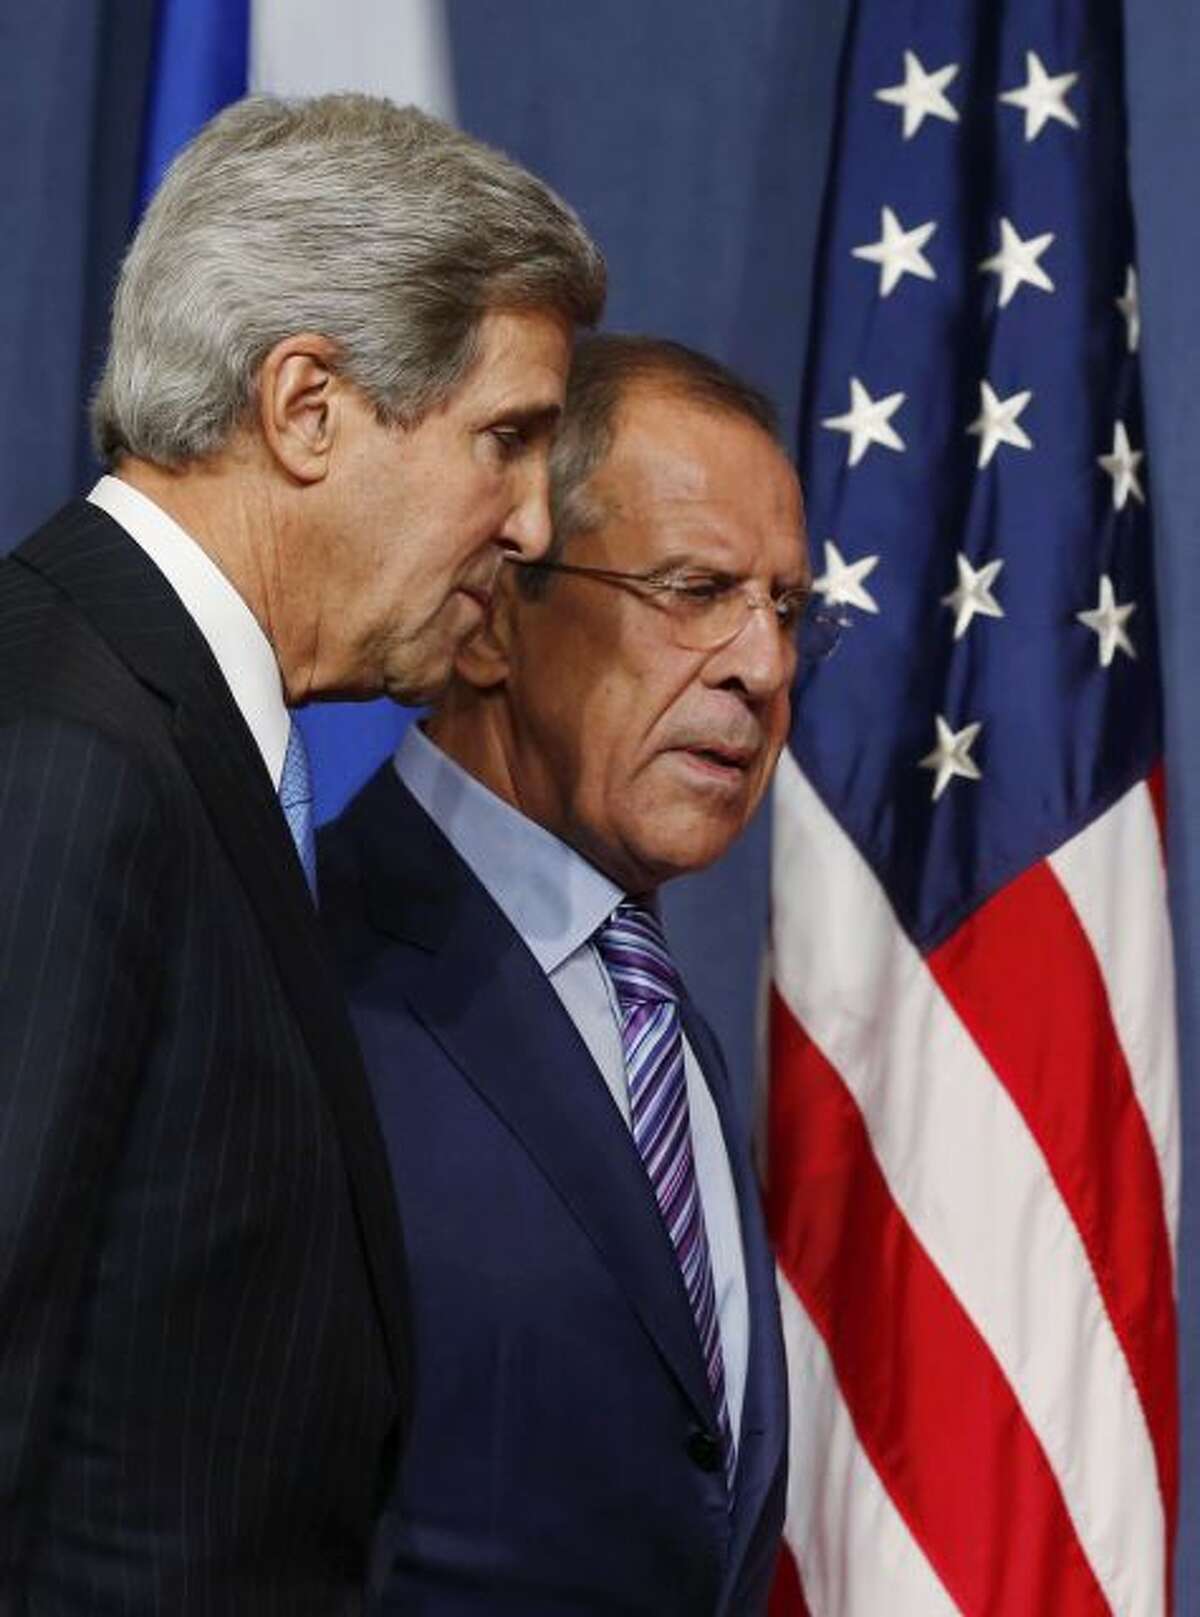 U.S. Secretary of State John Kerry and Russian Foreign Minister Sergey Lavrov, right, arrive for their press conference before their meeting to discuss the ongoing crisis in Syria, in Geneva, Switzerland, Thursday Sept. 12, 2013. Secretary of State John Kerry and his team have opened two days of meetings with their Russian counterparts in Geneva. Kerry is hoping to come away with the outlines of a plan for securing and destroying vast stockpiles of Syrian chemical weapons. (AP Photo/Larry Downing, Pool)